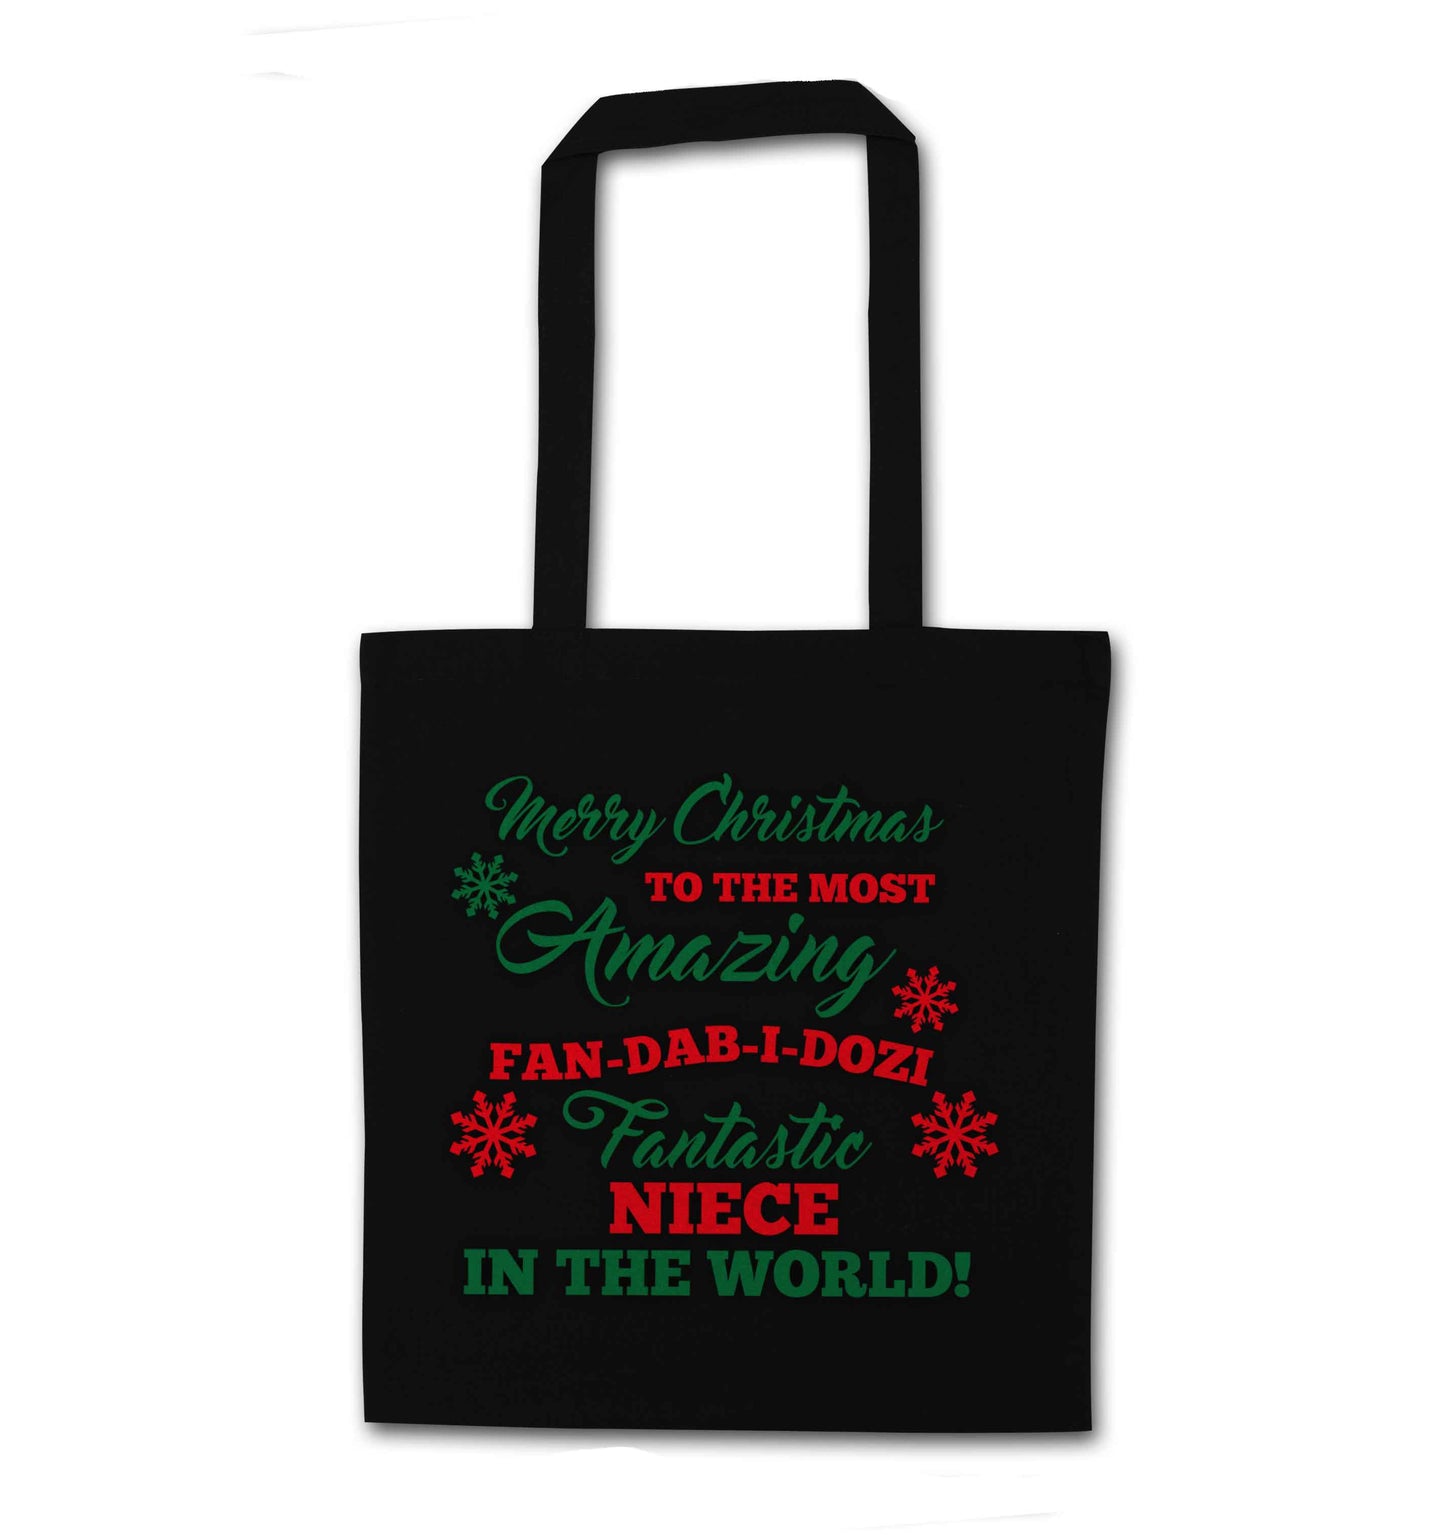 Merry Christmas to the most amazing fan-dab-i-dozi fantasic Niece in the world black tote bag